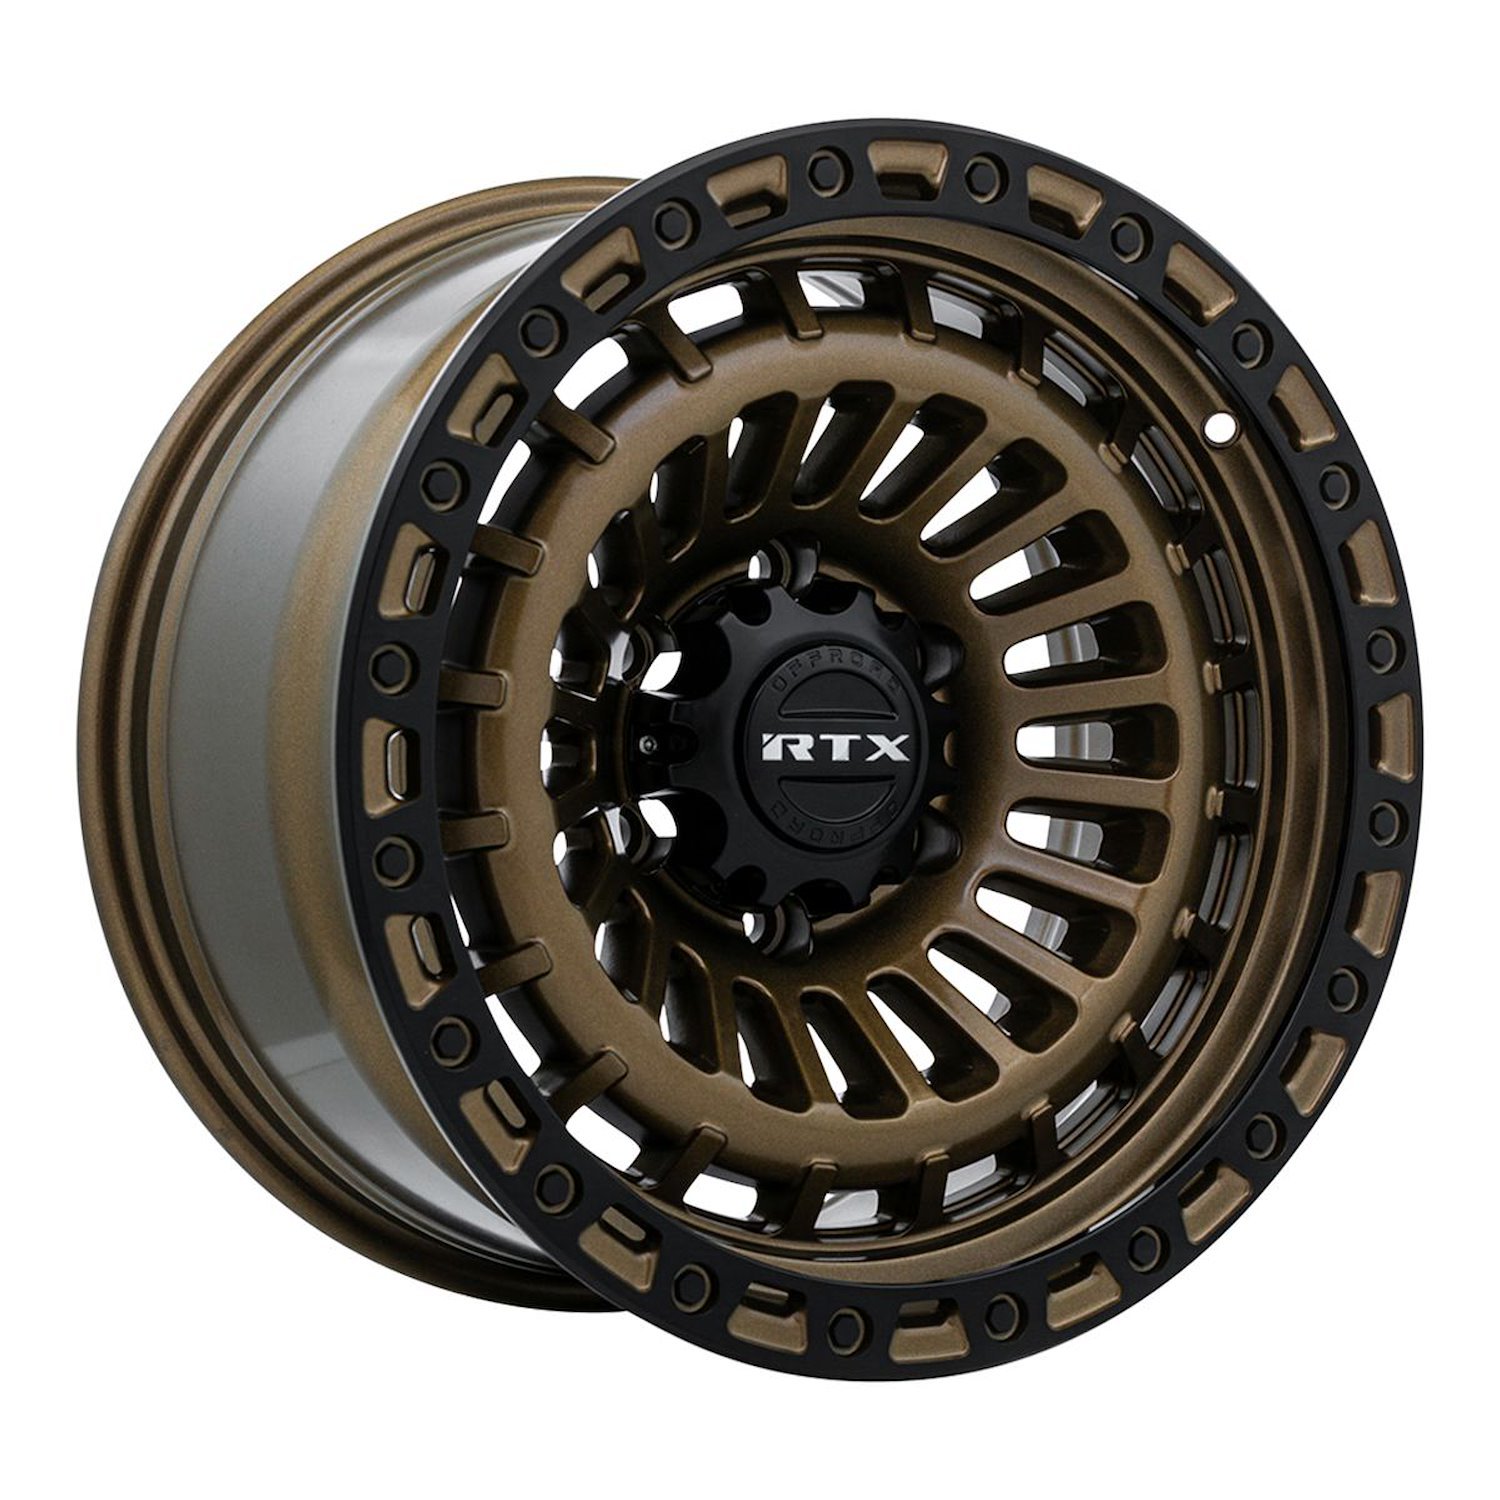 083098 Off-Road Series Moab Wheel [Size: 17" x 9"] Bronze with Satin Black Lip Finish